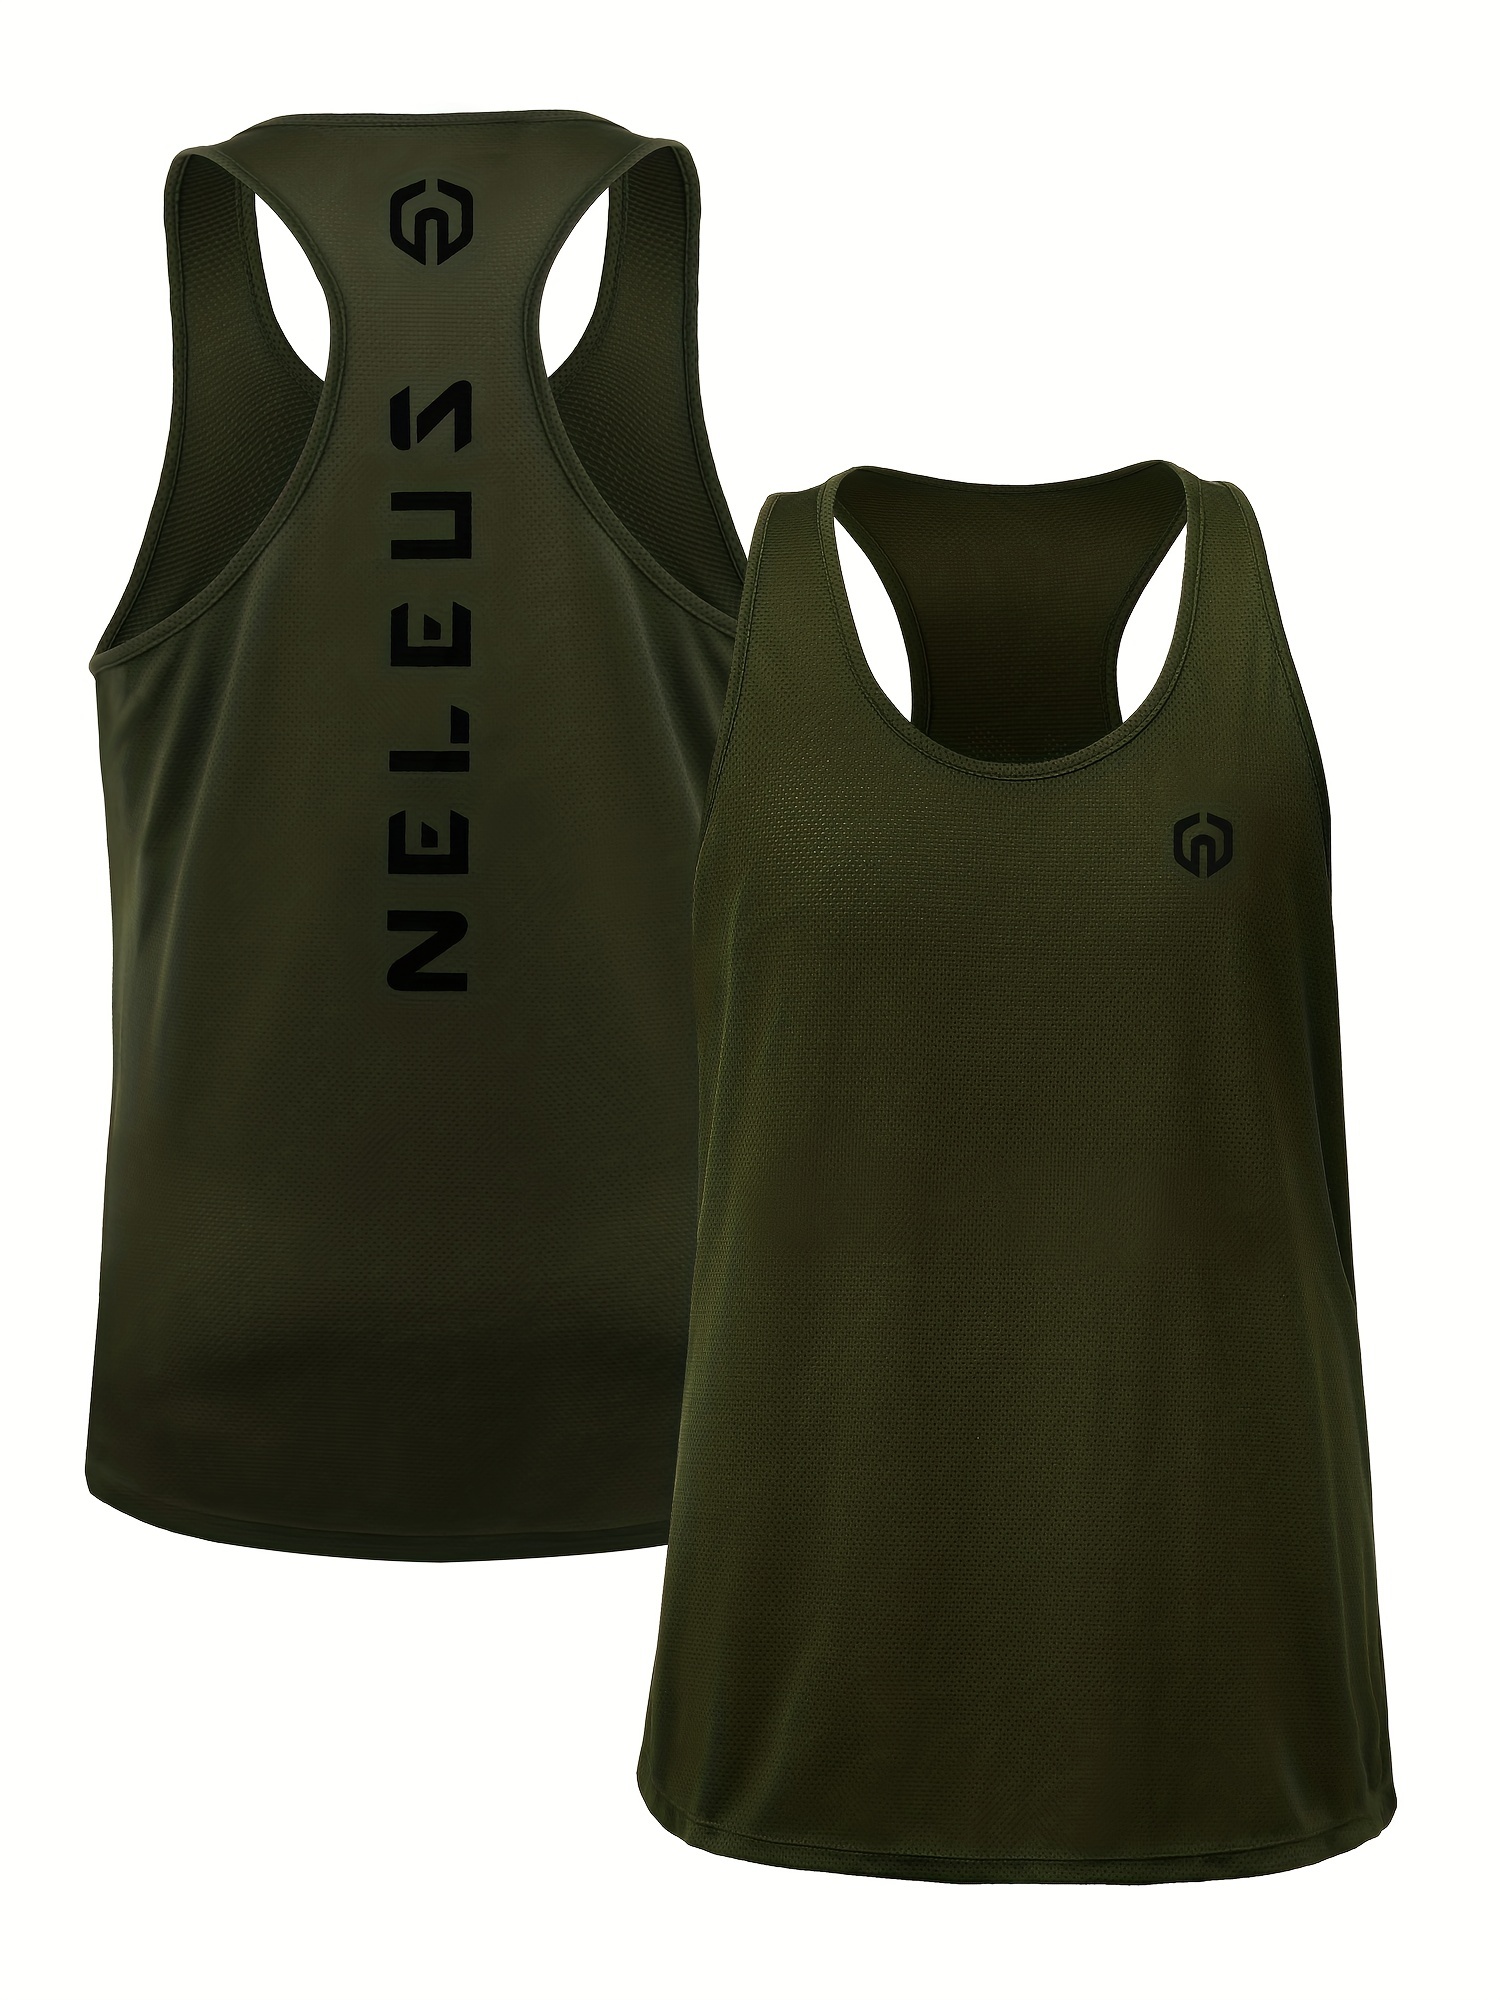  LALAGEN Plus Size Workout Tank Tops UV Sun Protection Shirt  Loose Fit Athletic Running Shirts Army Green L : Clothing, Shoes & Jewelry